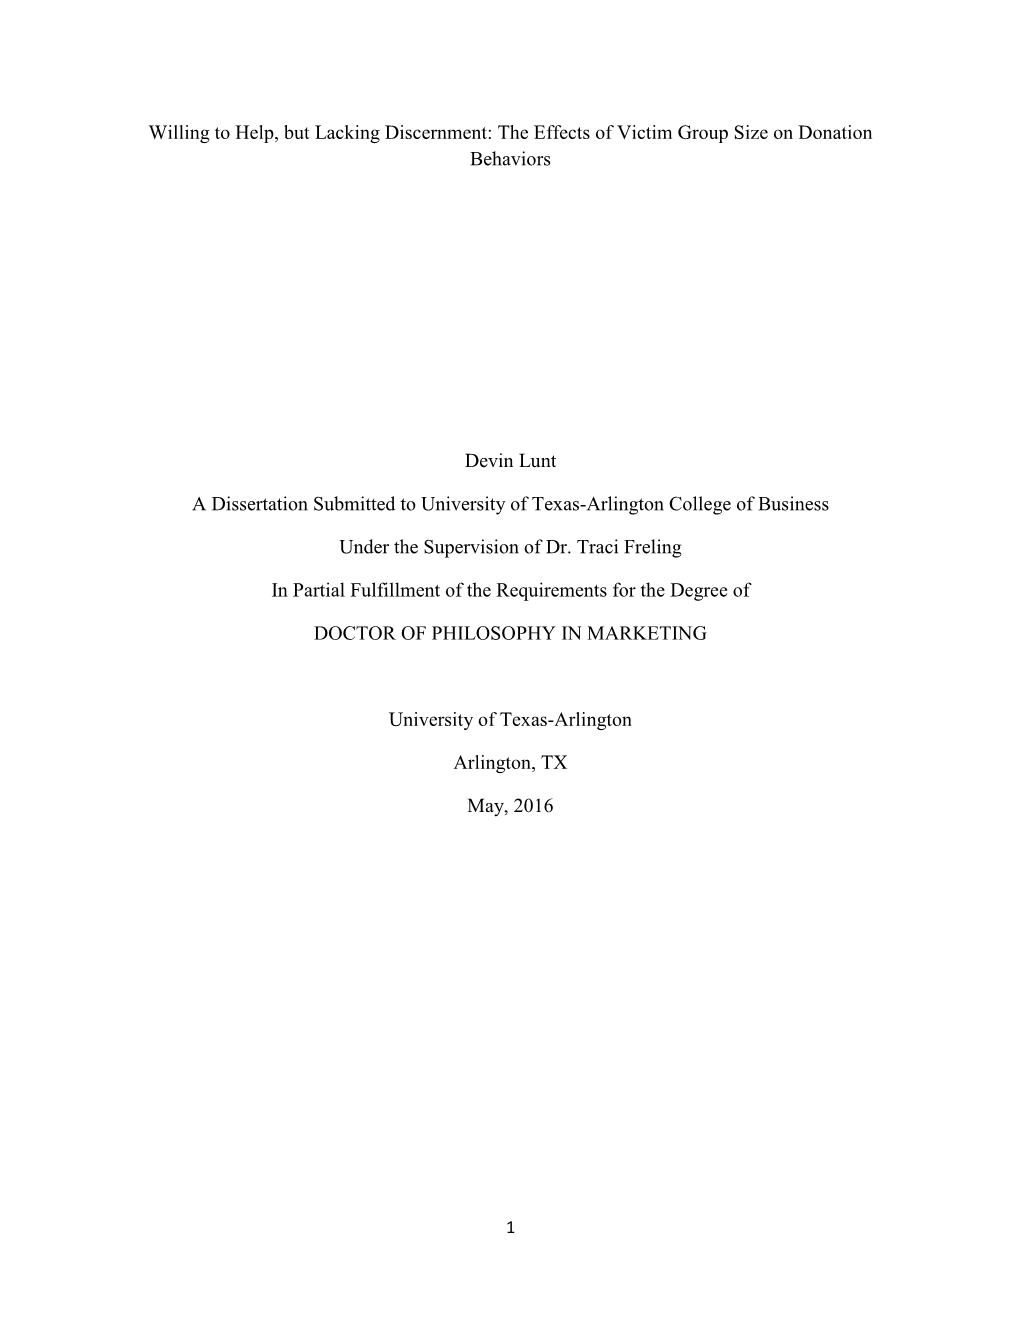 Willing to Help, but Lacking Discernment: the Effects of Victim Group Size on Donation Behaviors Devin Lunt a Dissertation Submi